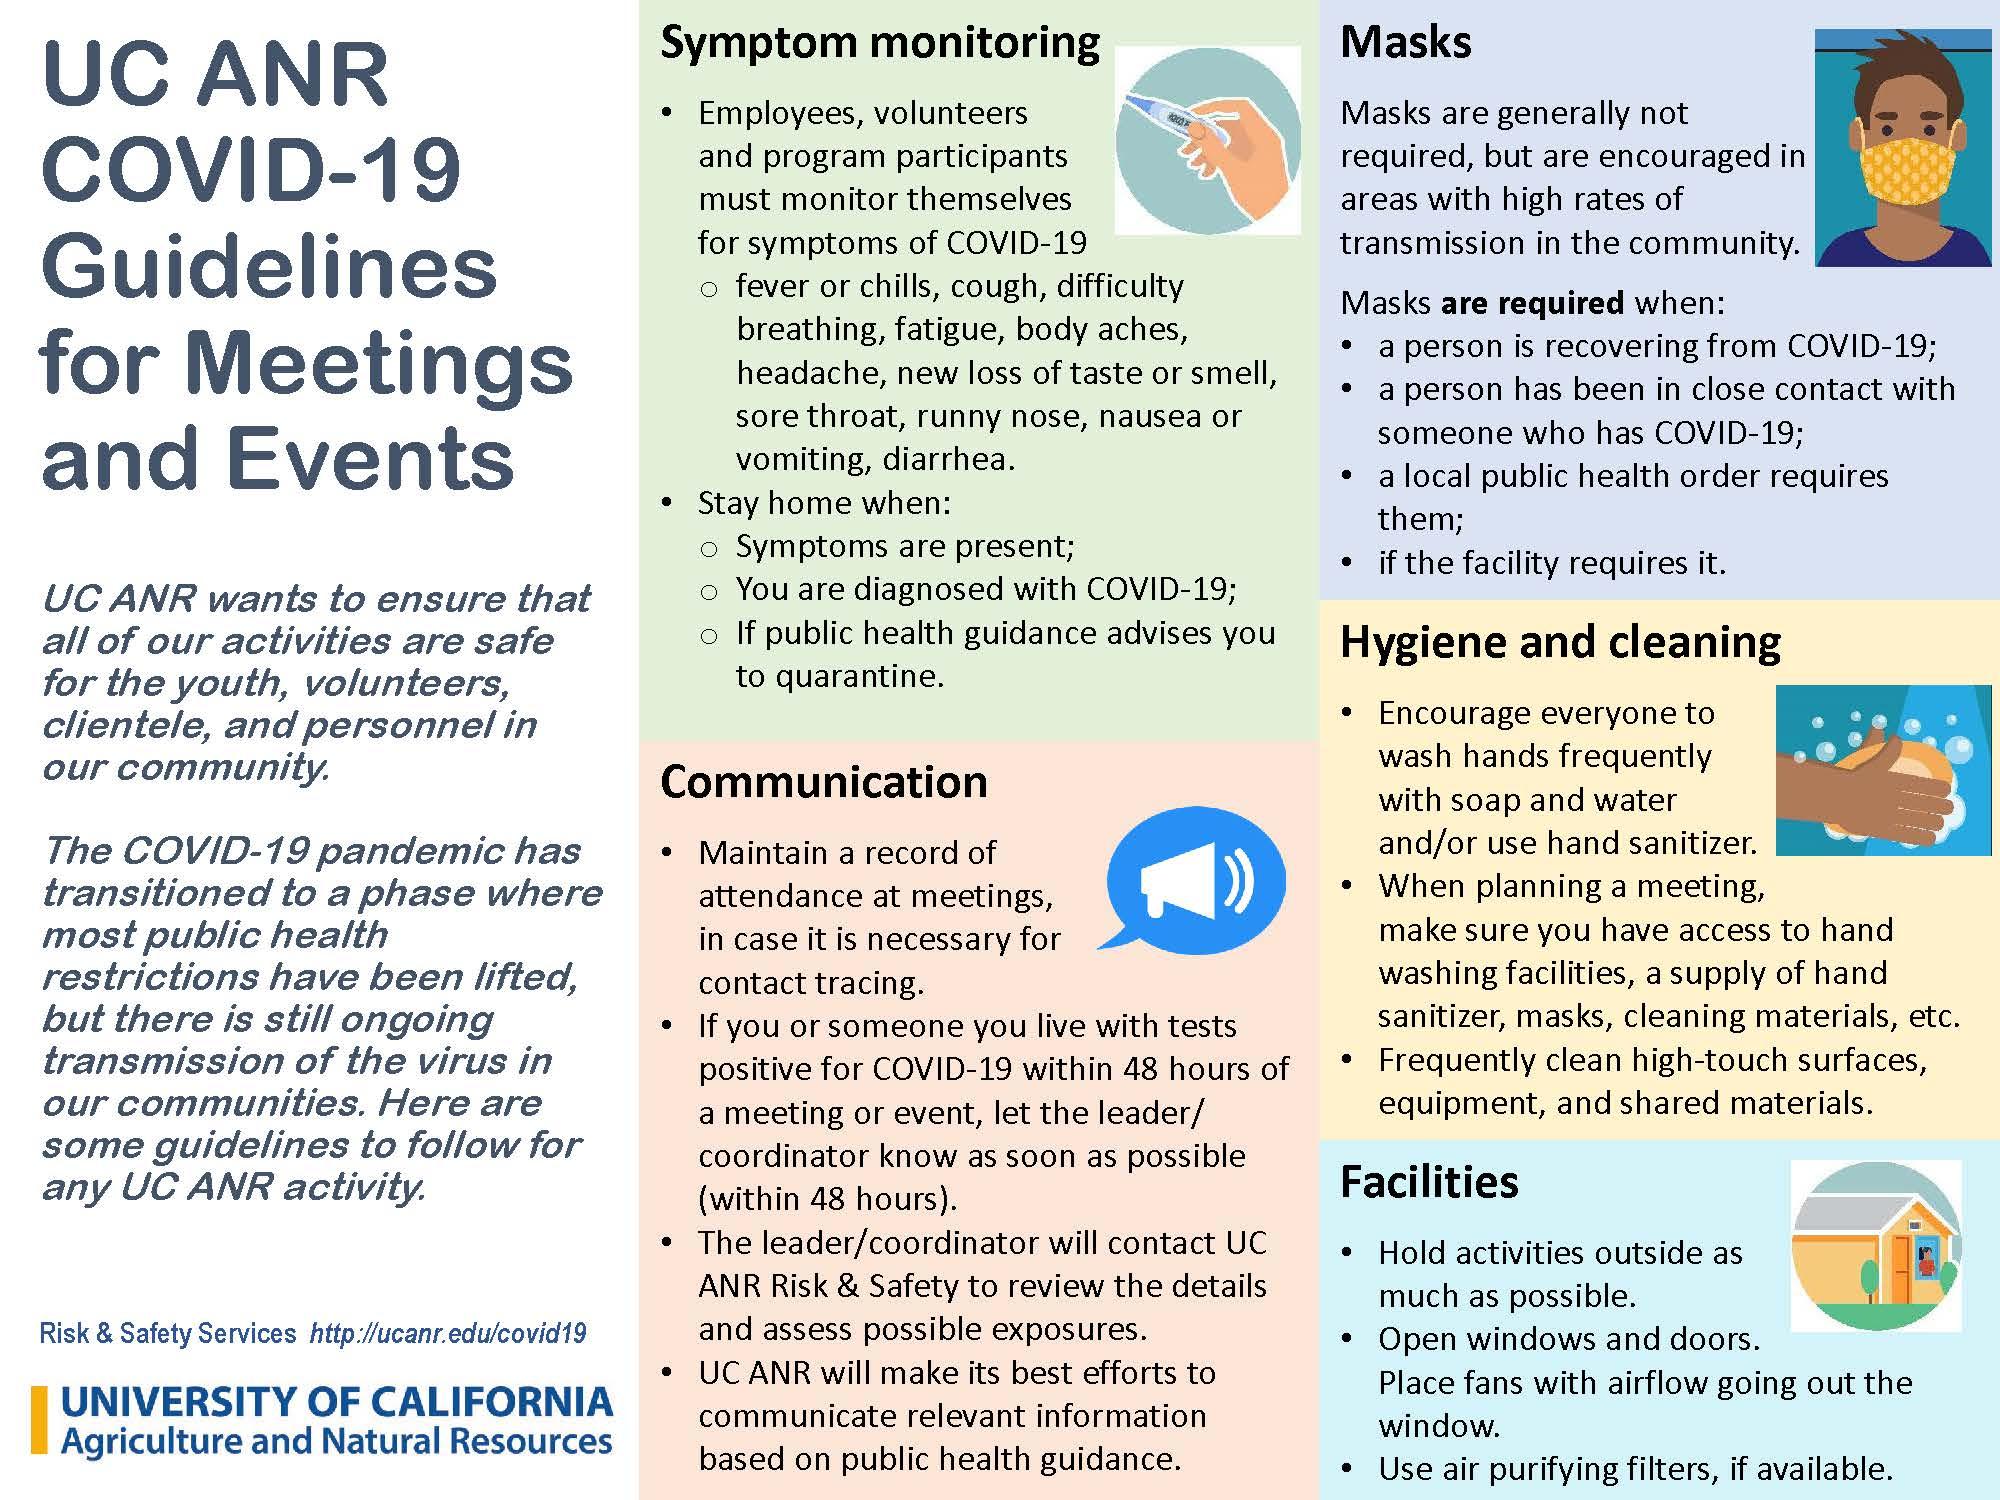 UCANR Meeting Guidelines During COVID-19 poster